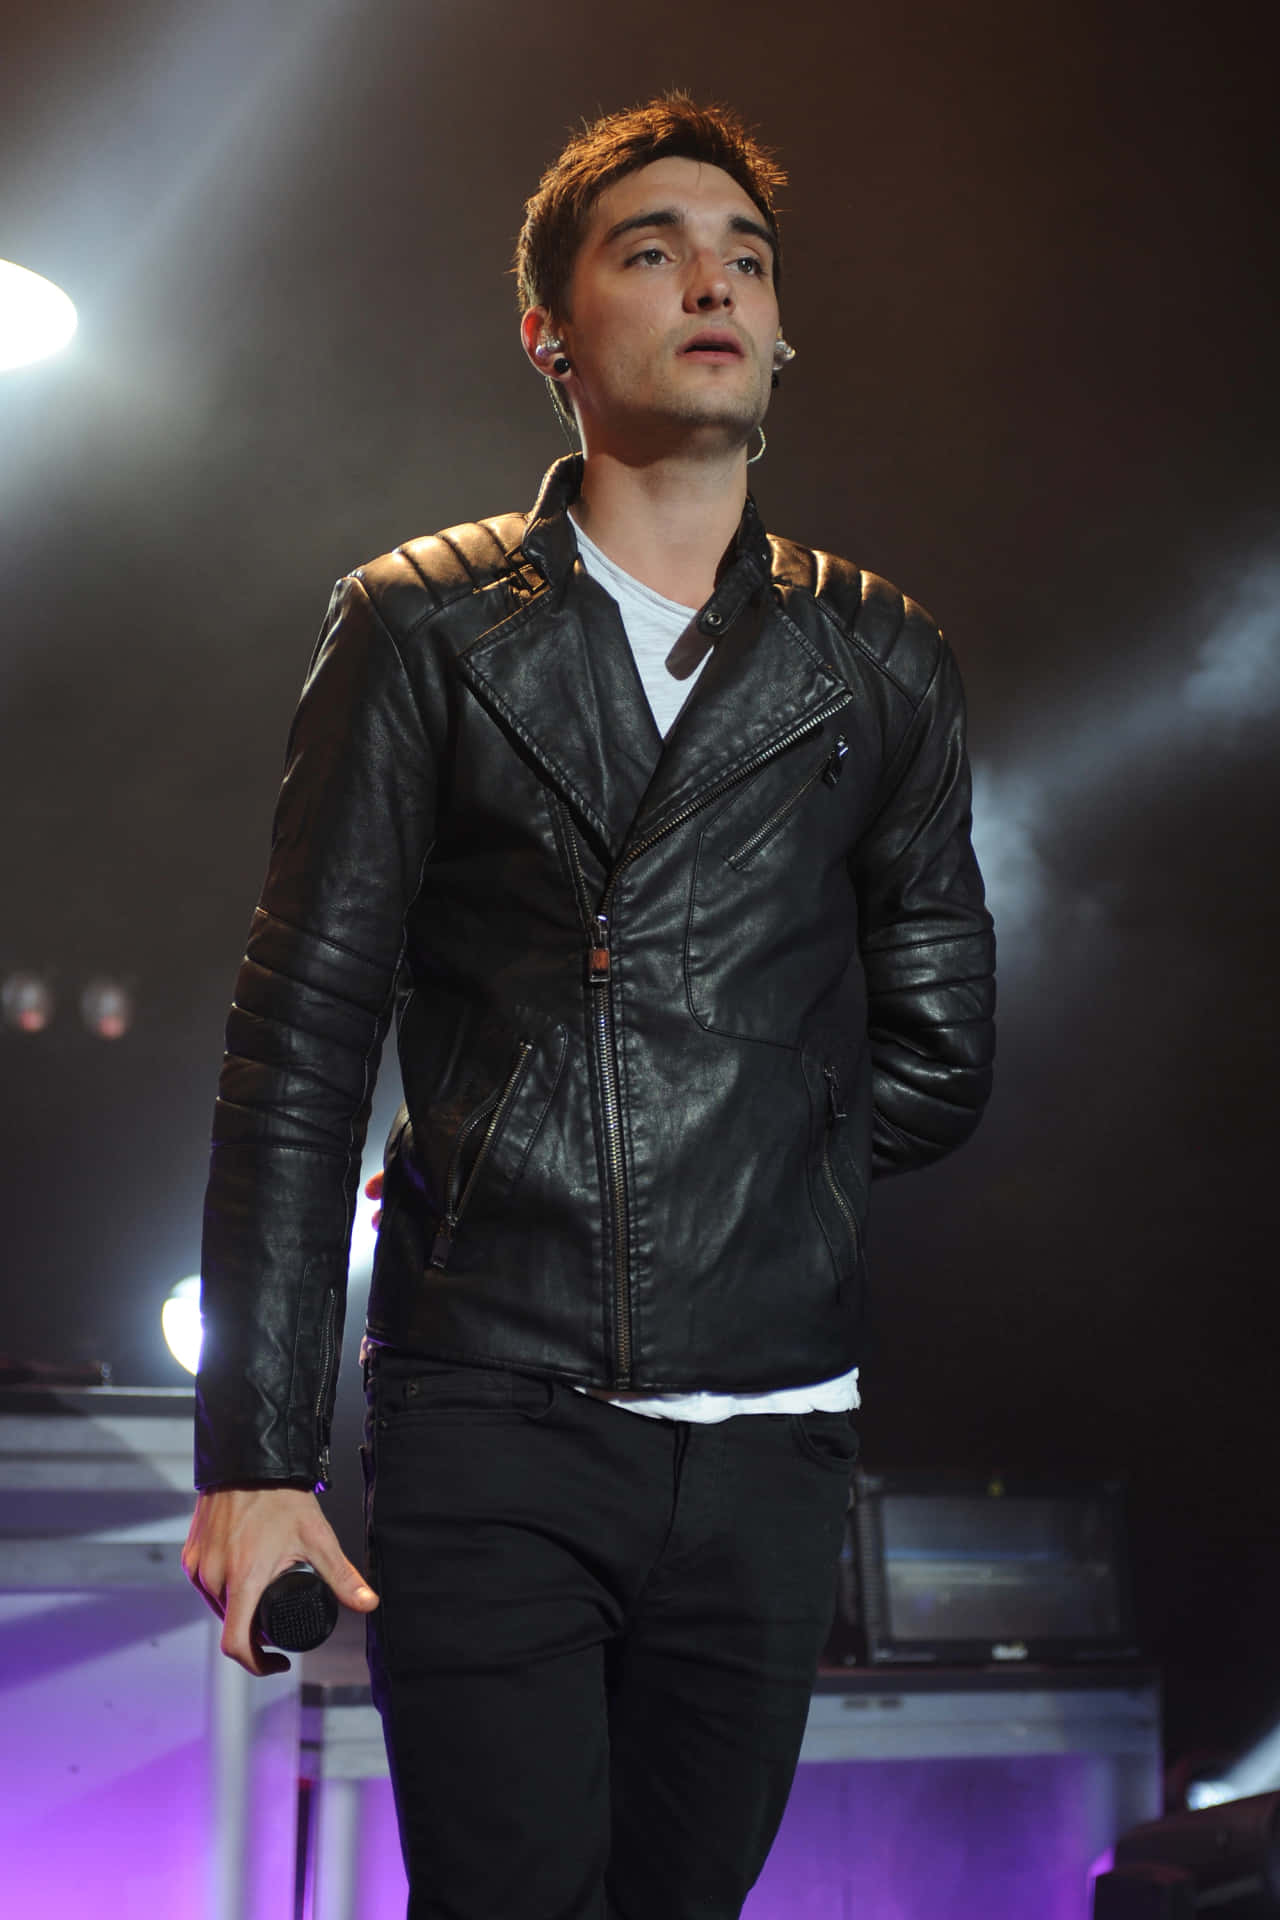 Caption: Tom Parker: The Voice of a Generation Wallpaper